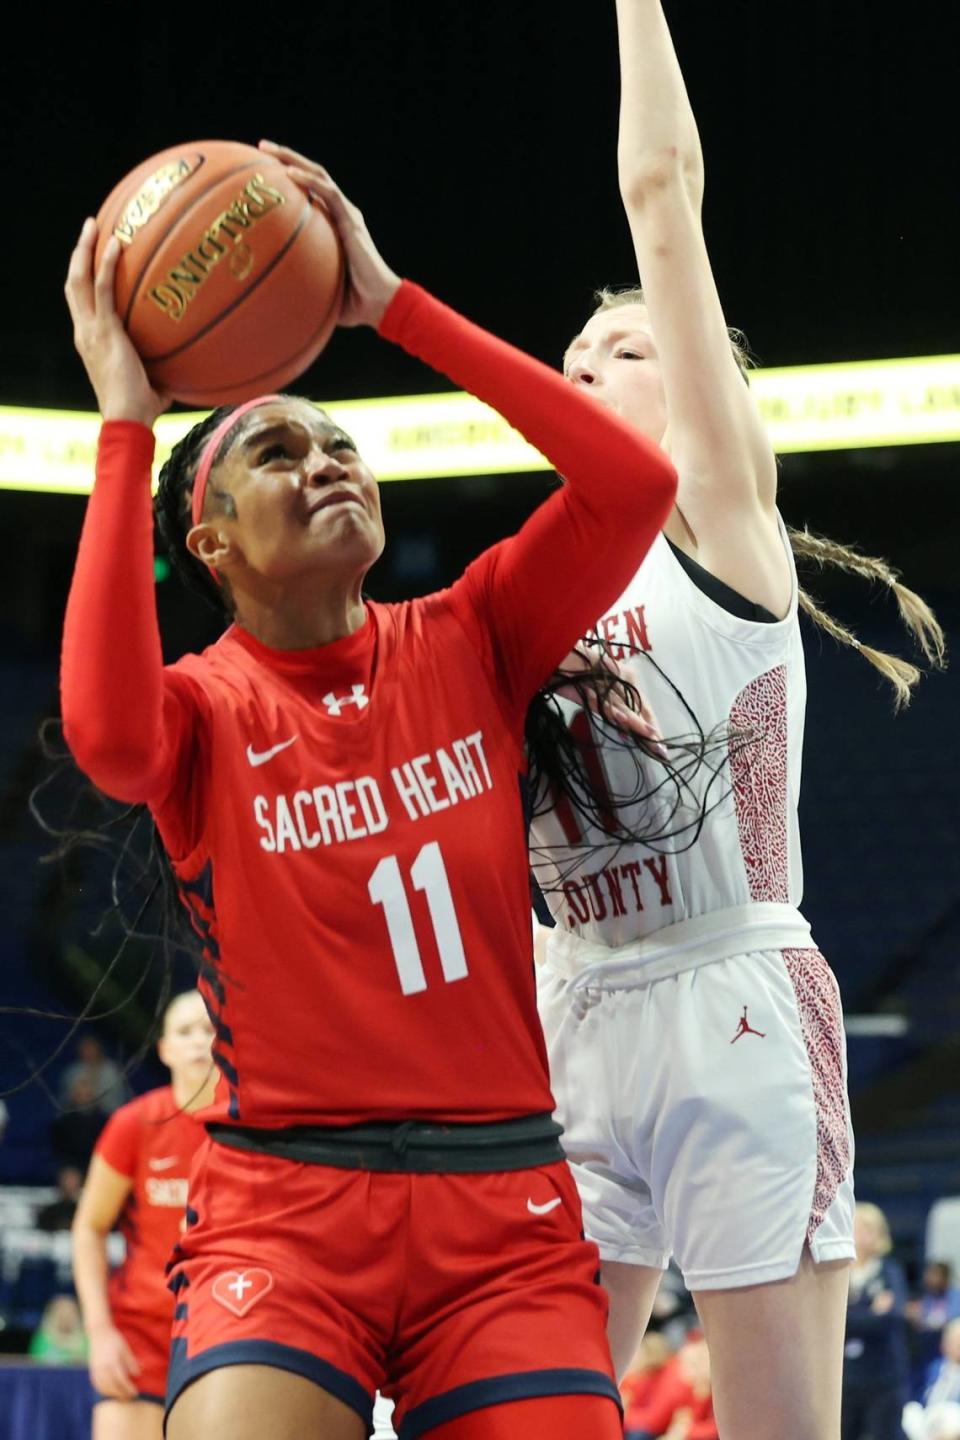 ZaKiyah Johnson (11) helped lead Sacred Heart Academy to its fourth consecutive Kentucky high school basketball state championship in Rupp Arena last month. James Crisp